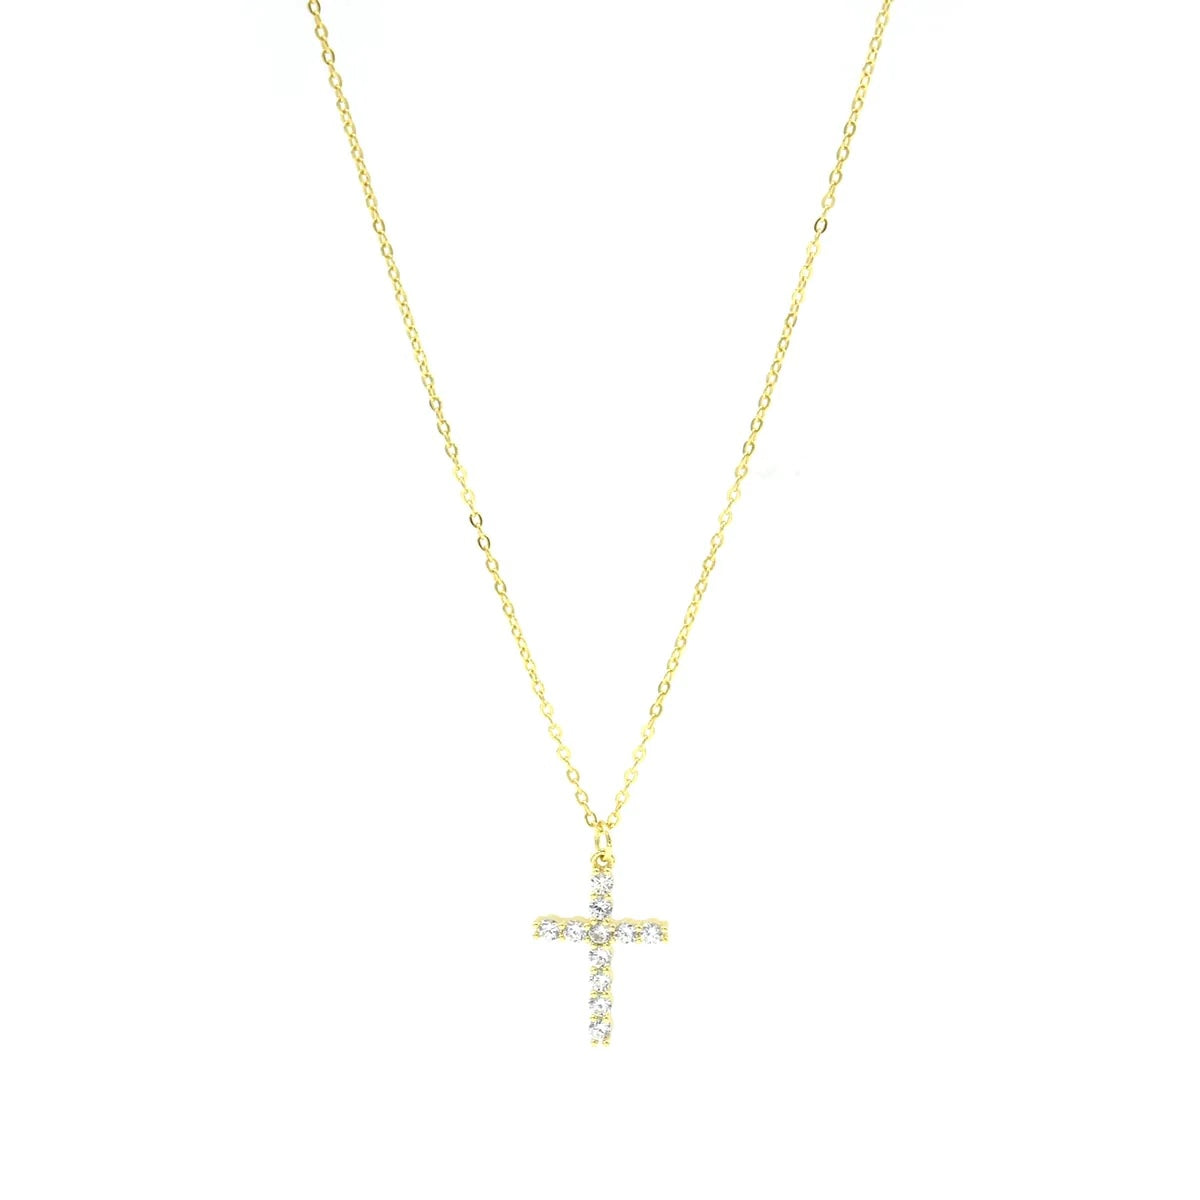 Necklaces, cross necklaces, Gold plated cross necklaces, nickel free, .925 sterling silver, hypoallergenic, waterproof necklaces, jewelry, fashion jewelry, rhinestone necklaces, rhinestone cross necklaces, cubic zirconia necklaces, cubic zirconia cross necklaces, Kesley Boutique, gift ideas, religious gift ideas, graduation gift ideas, church gift ideas, fashion jewelry, kesley boutique 